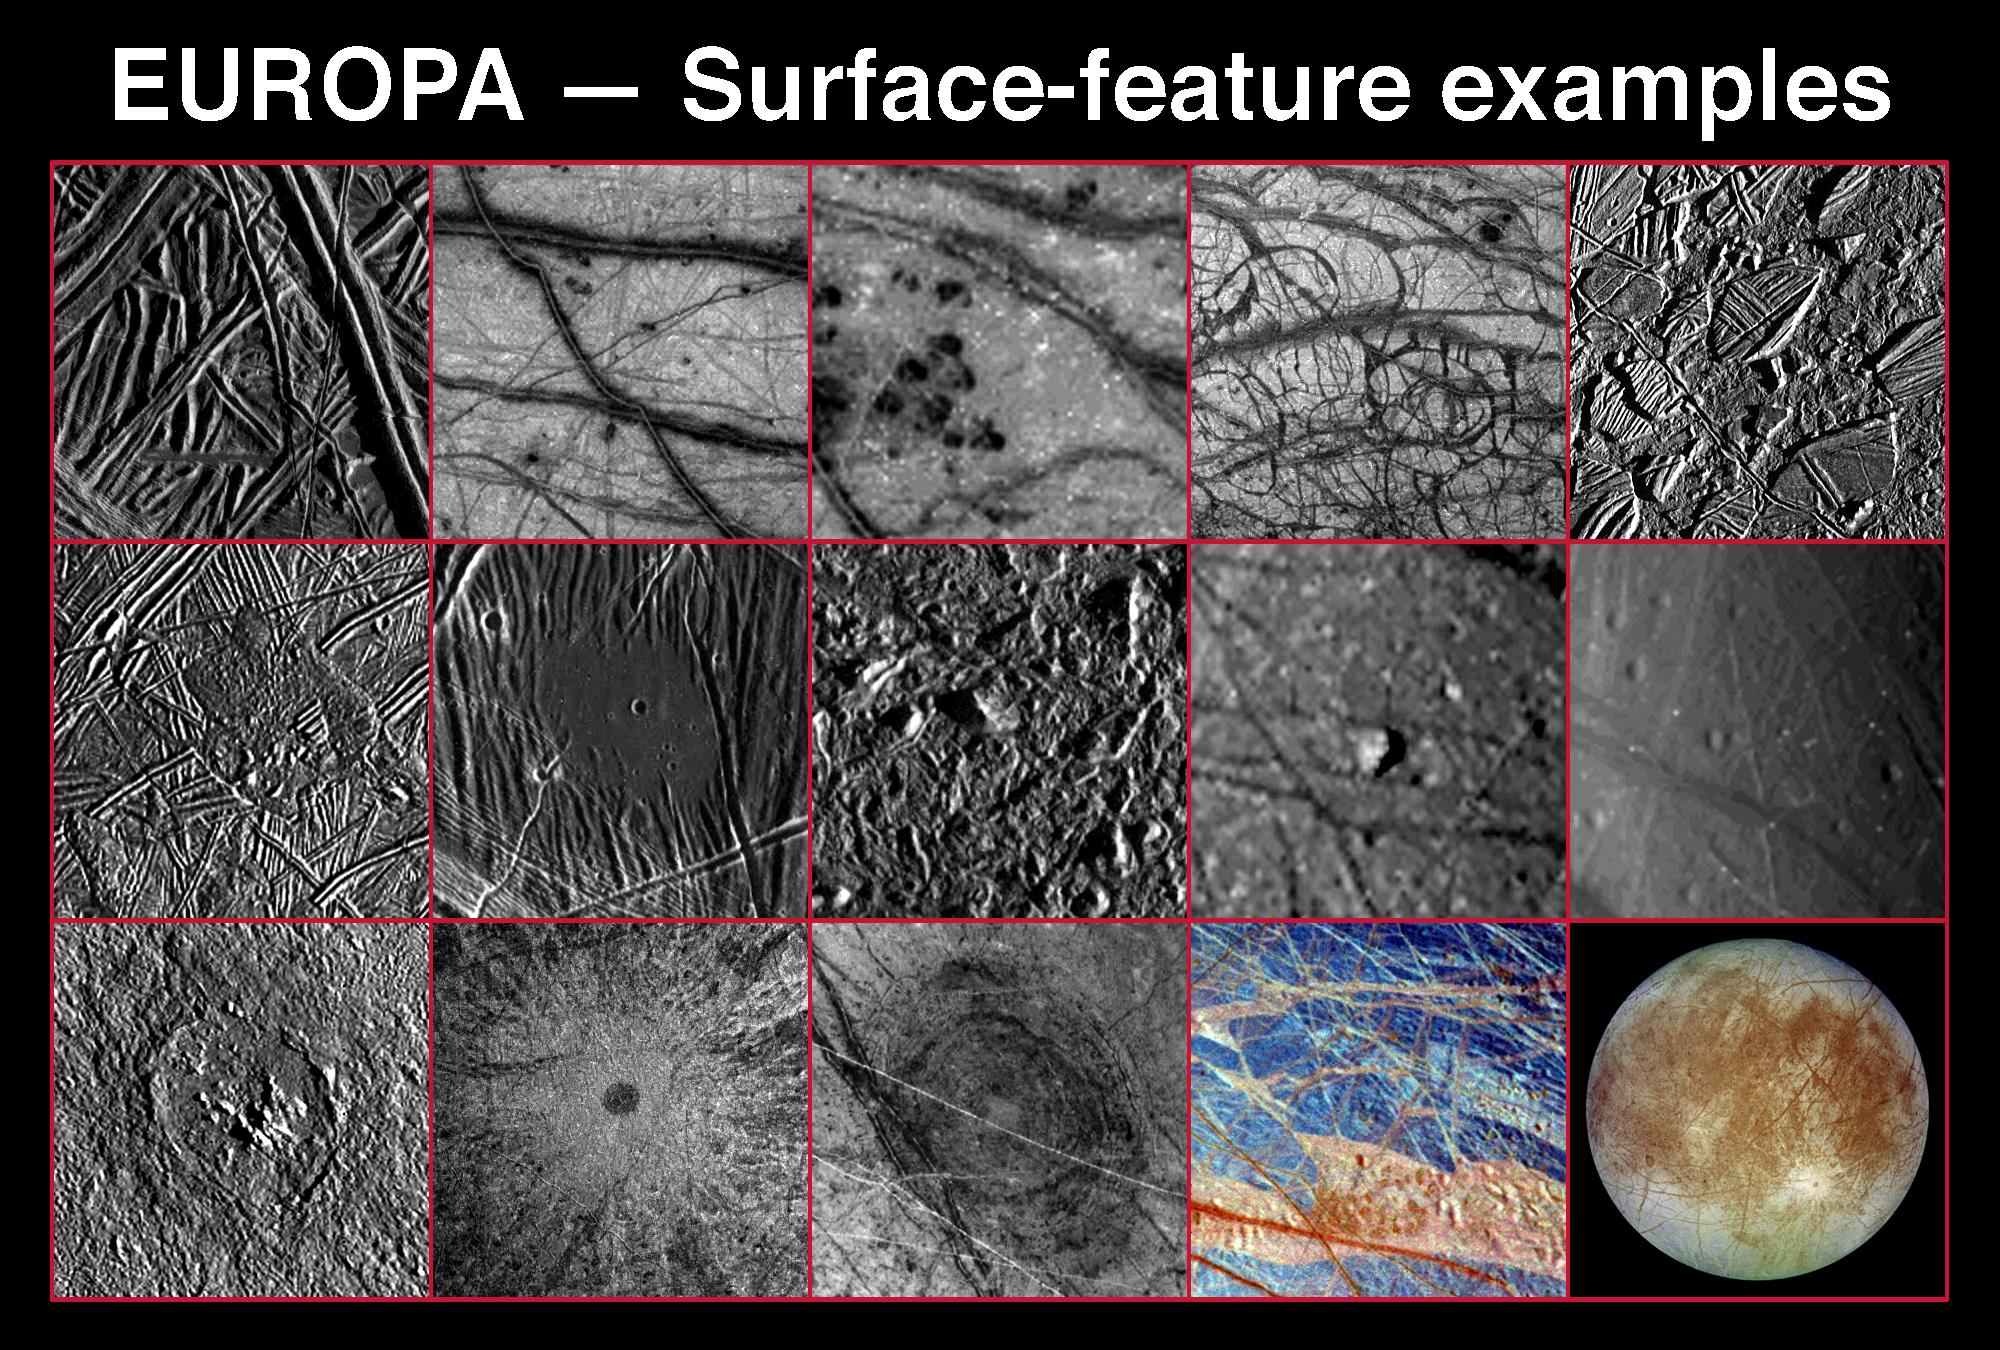 Landscapes and Features of Europa – NASA's Europa Clipper